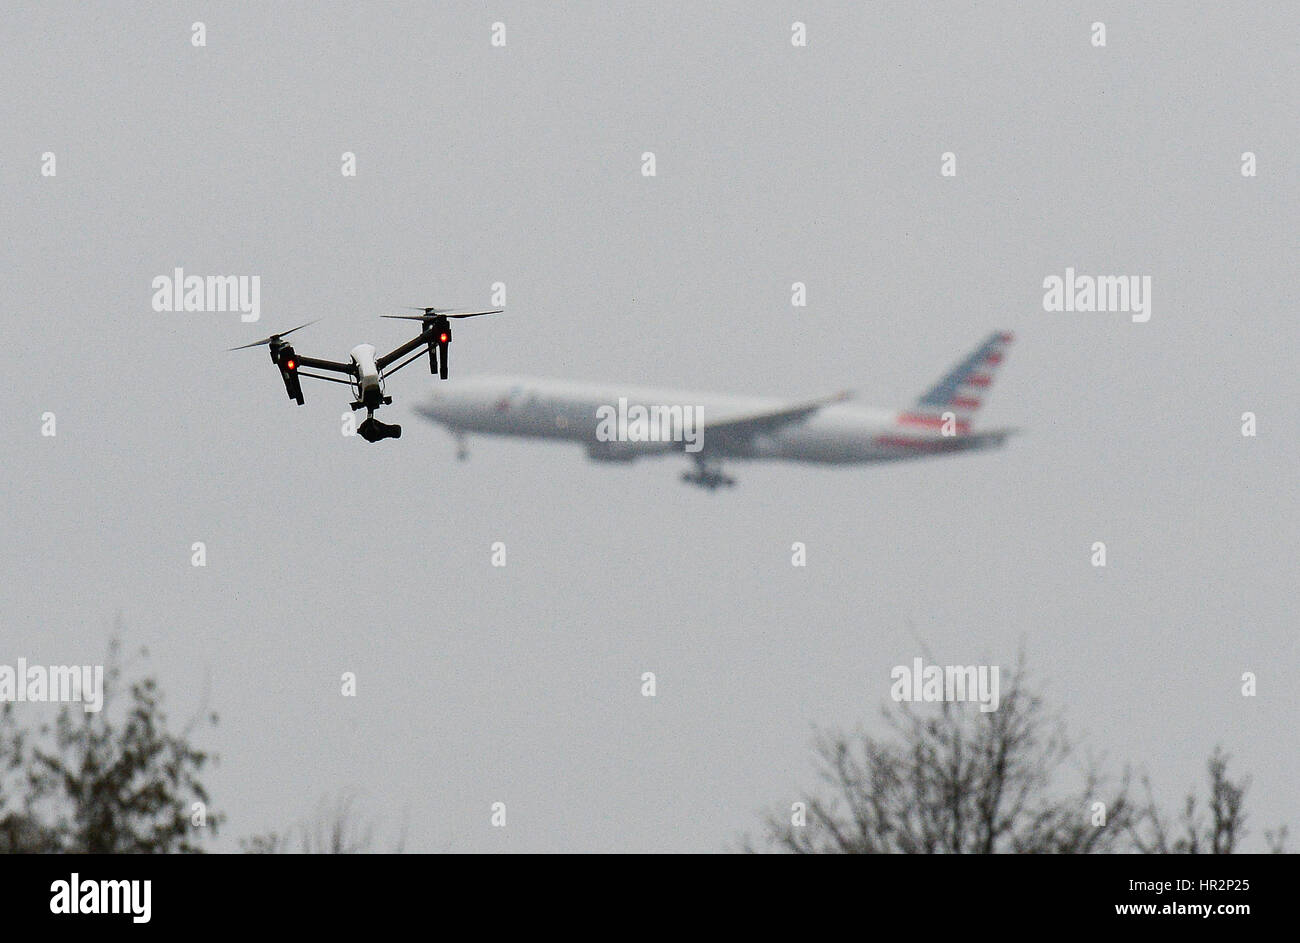 A drone flies in Hanworth Park in west London, as a British Airways 747 plane prepares to land at Heathrow Airport behind. Stock Photo